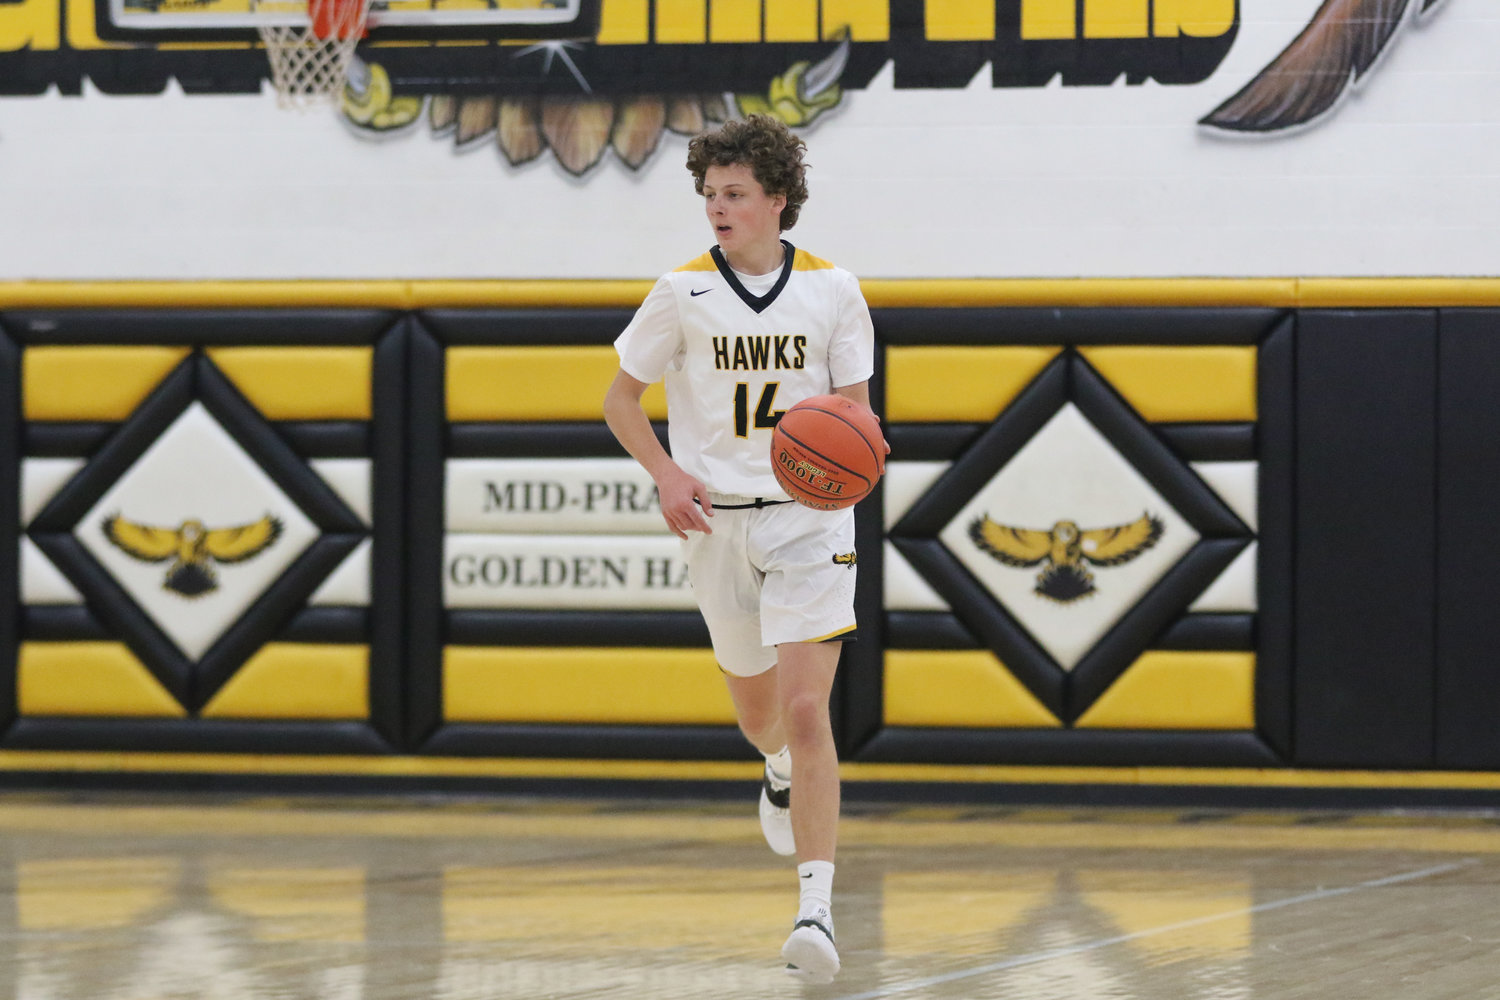 Jackson Pennington brings the ball up the court during the first quarter of a scrimmage with Mediapolis in Wellman on Saturday, November 21.